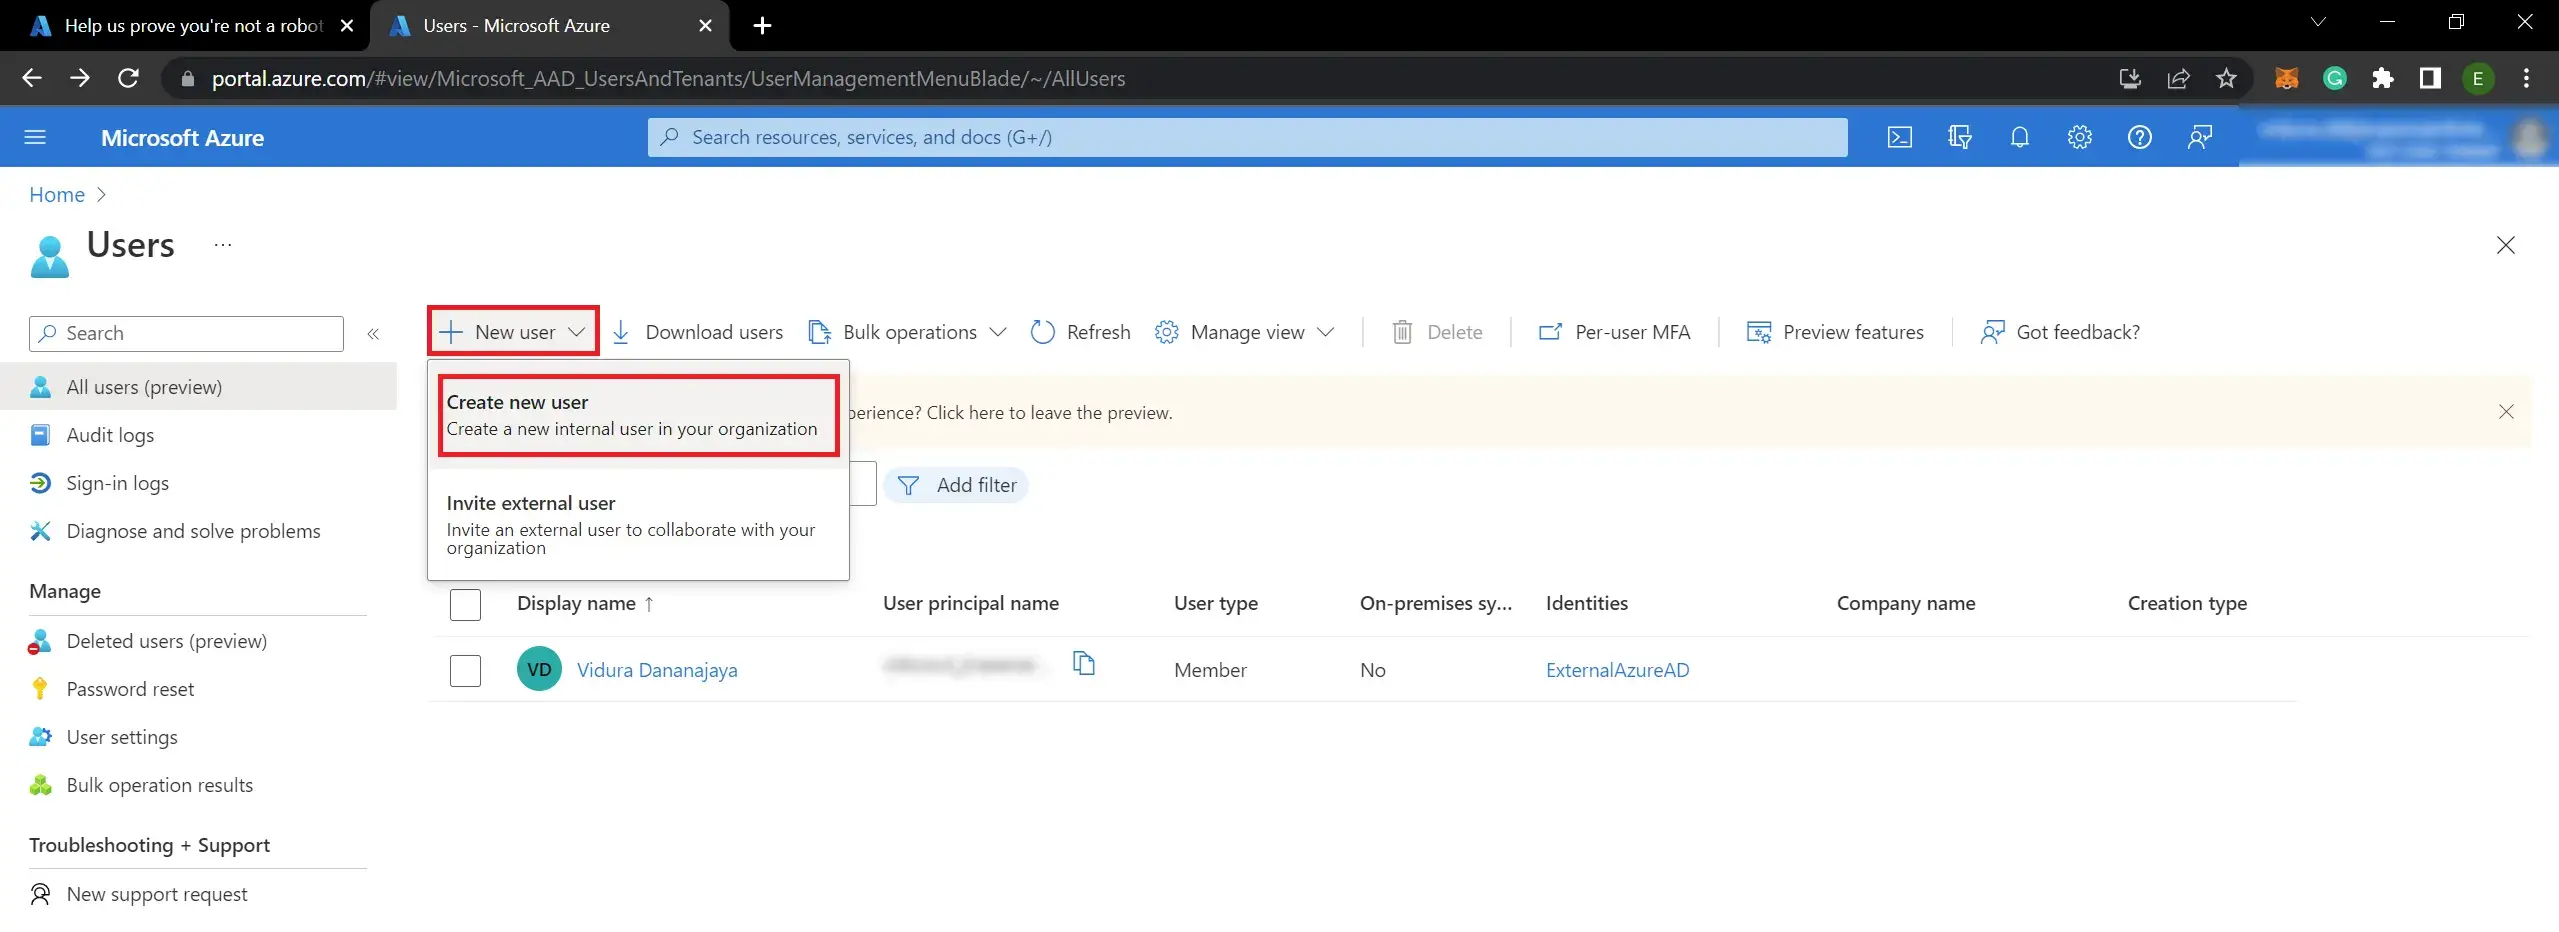 How to add new users to Microsoft Azure tenant